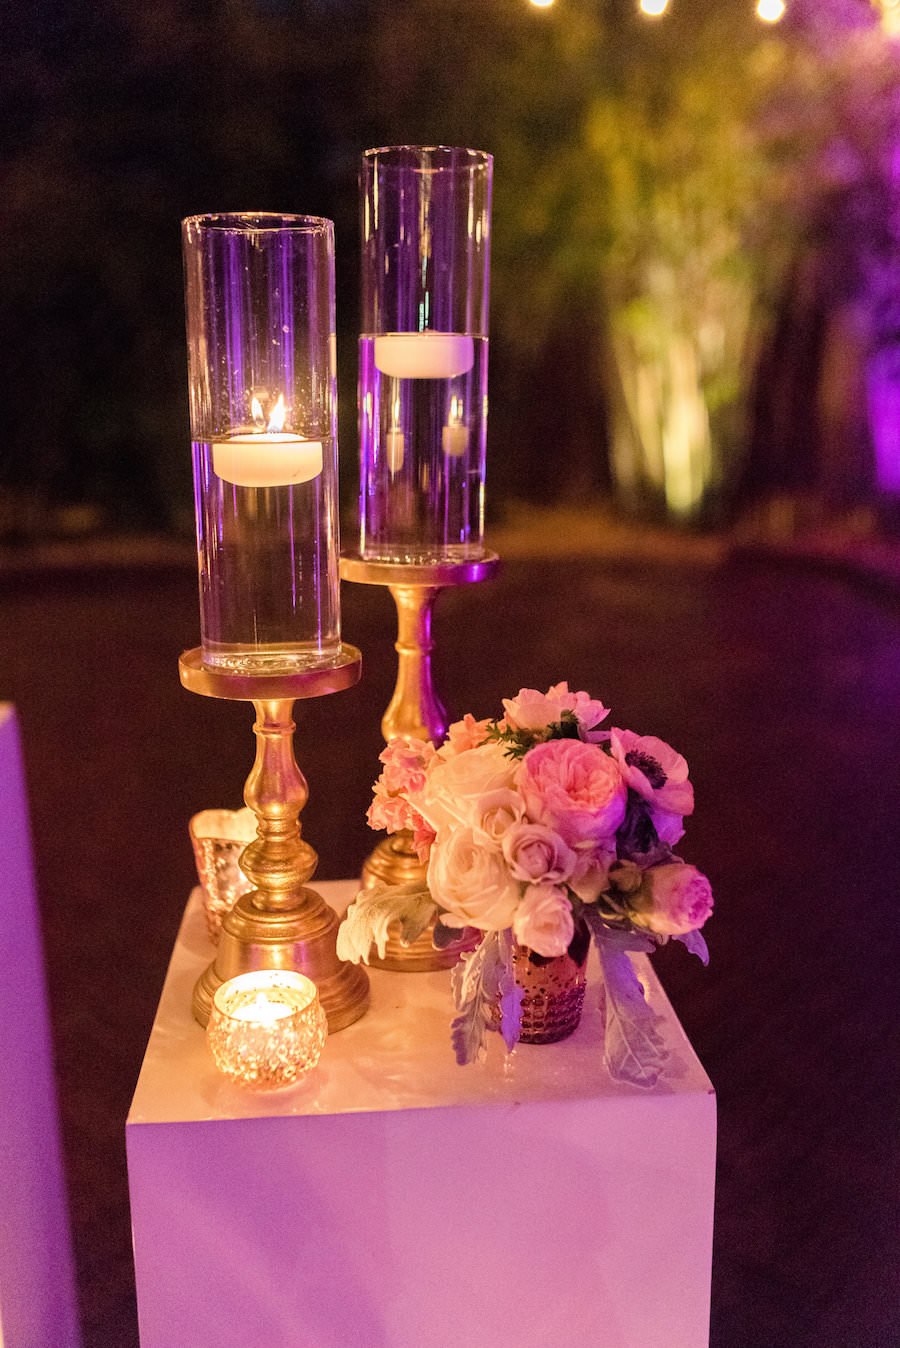 St. Petersburg Outdoor Wedding Ceremony Decor with White and Pink Flowers and Candlelight | Downtown St. Pete Wedding Venue NOVA 535